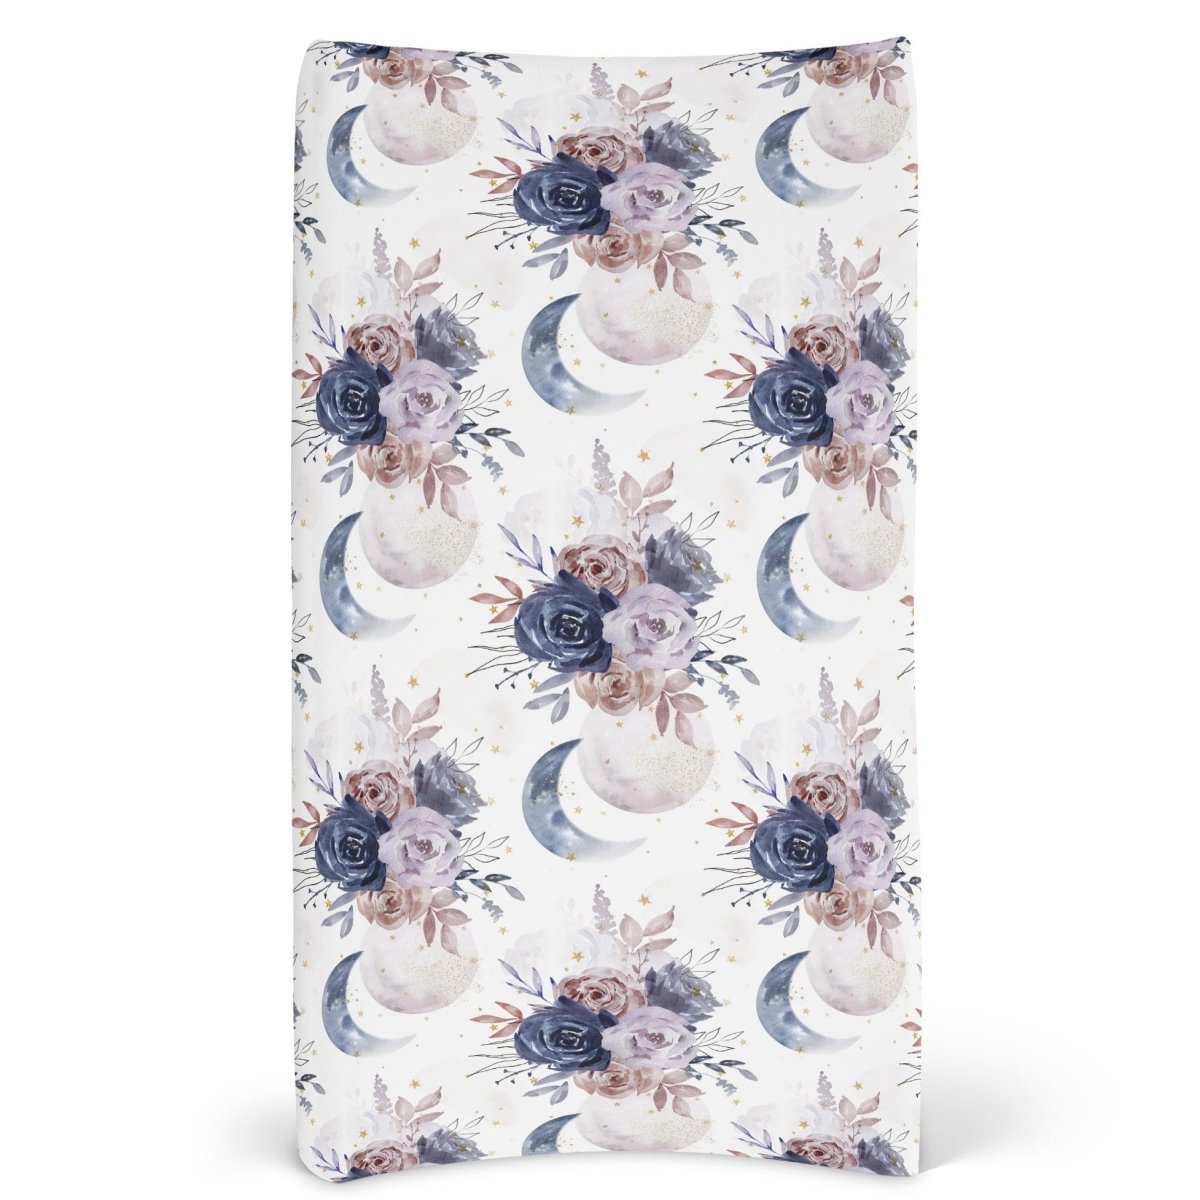 Floral Moon Changing Pad Cover - Floral Moon, gender_girl, Theme_Boho